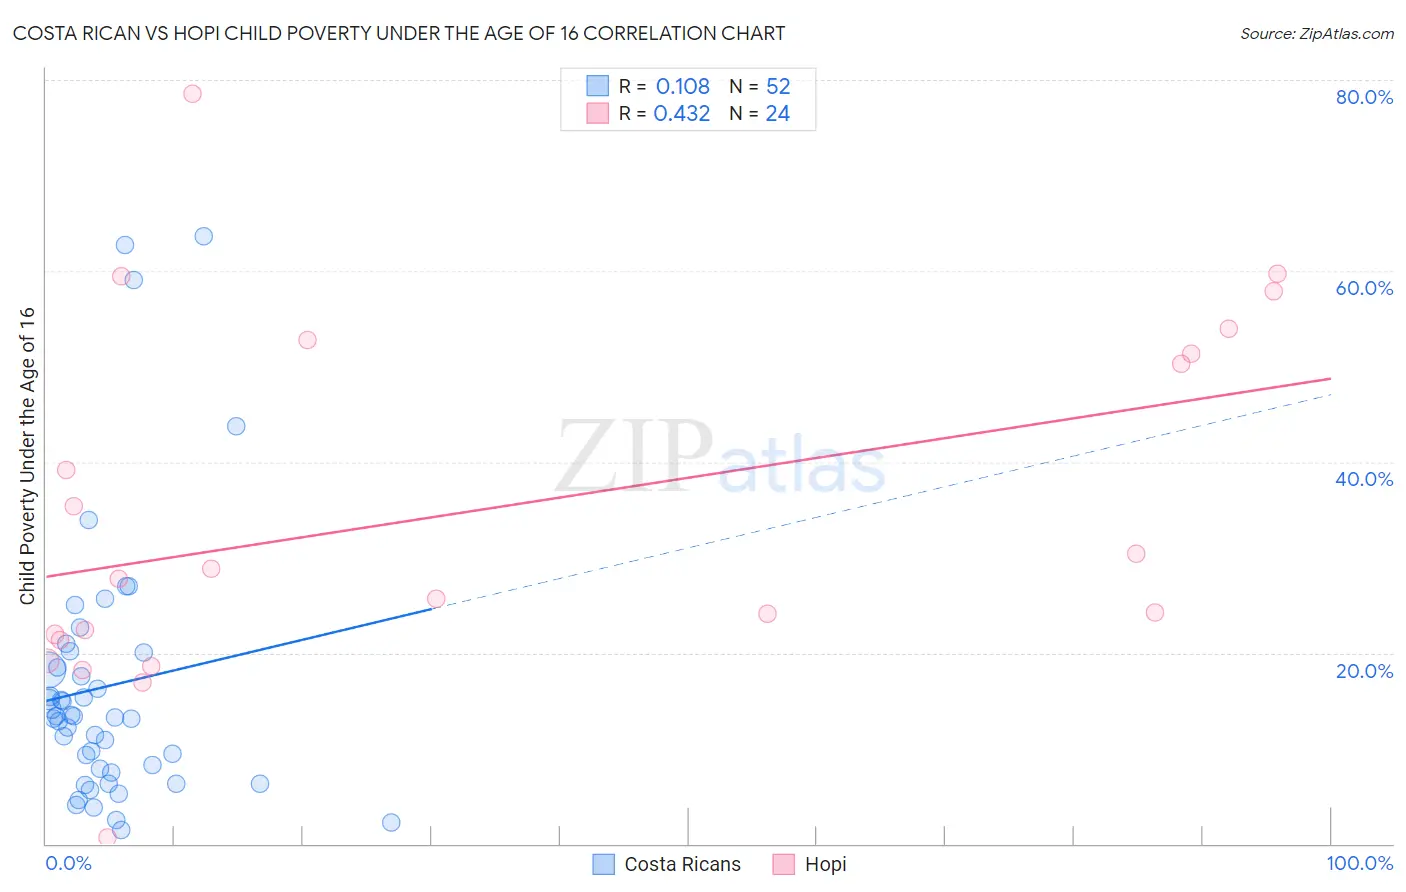 Costa Rican vs Hopi Child Poverty Under the Age of 16